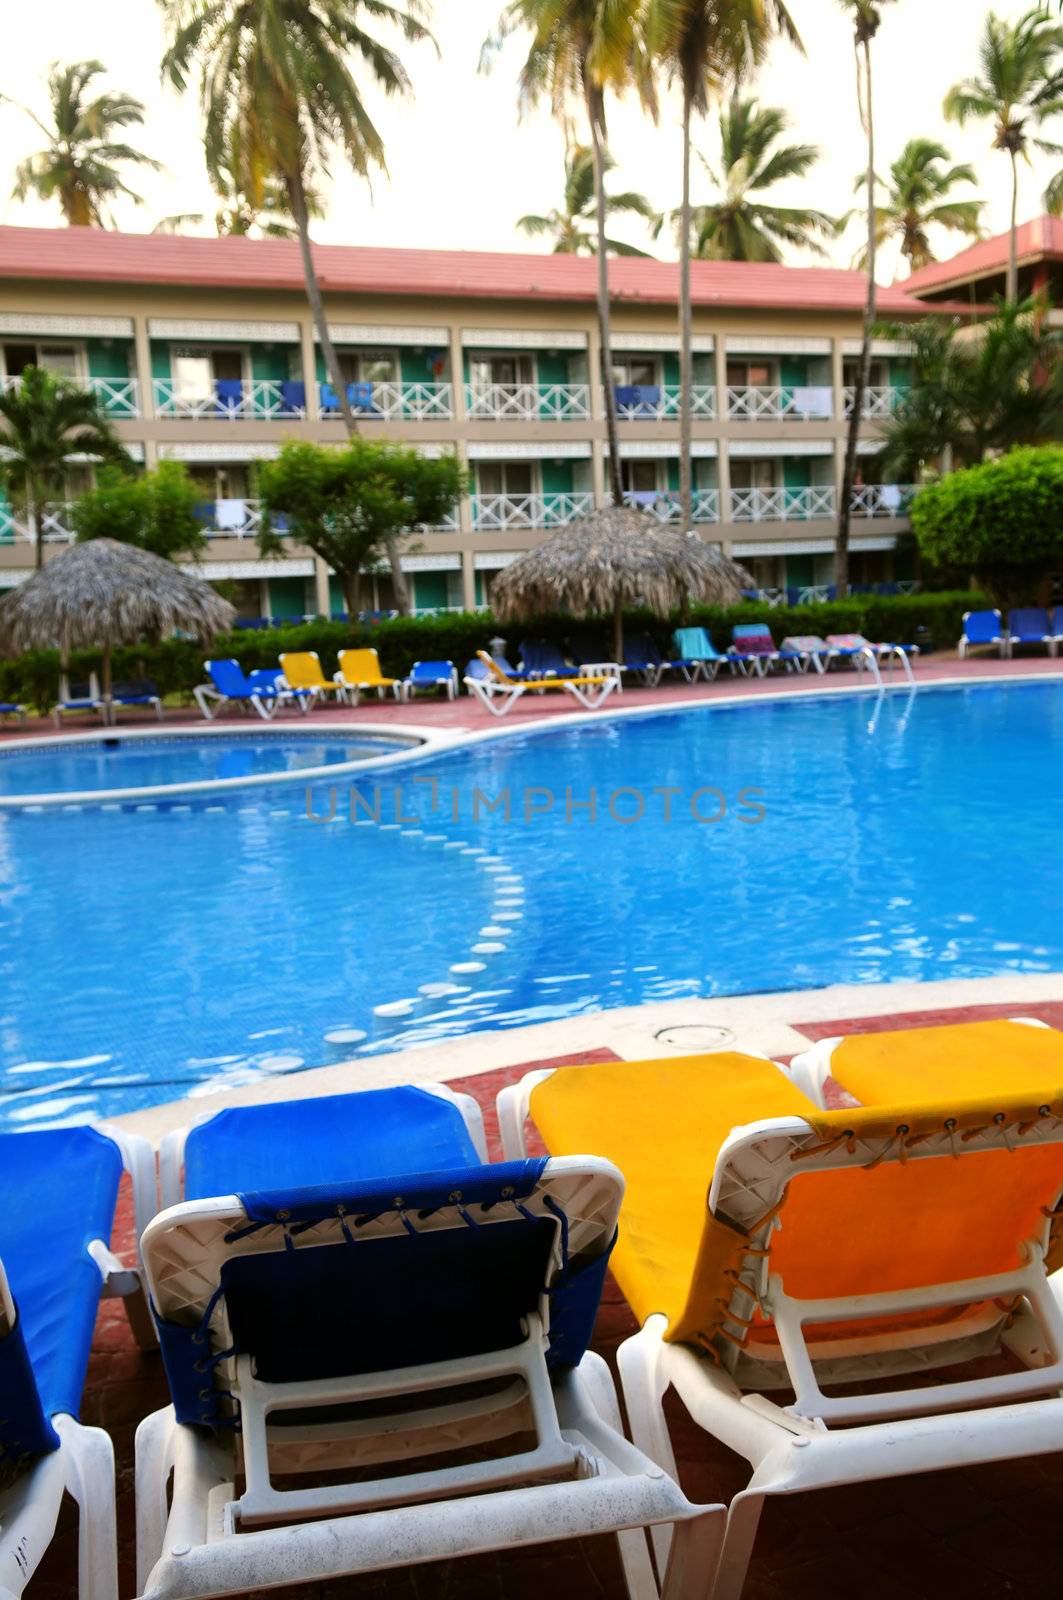 Swimming pool and chairs at tropical resort